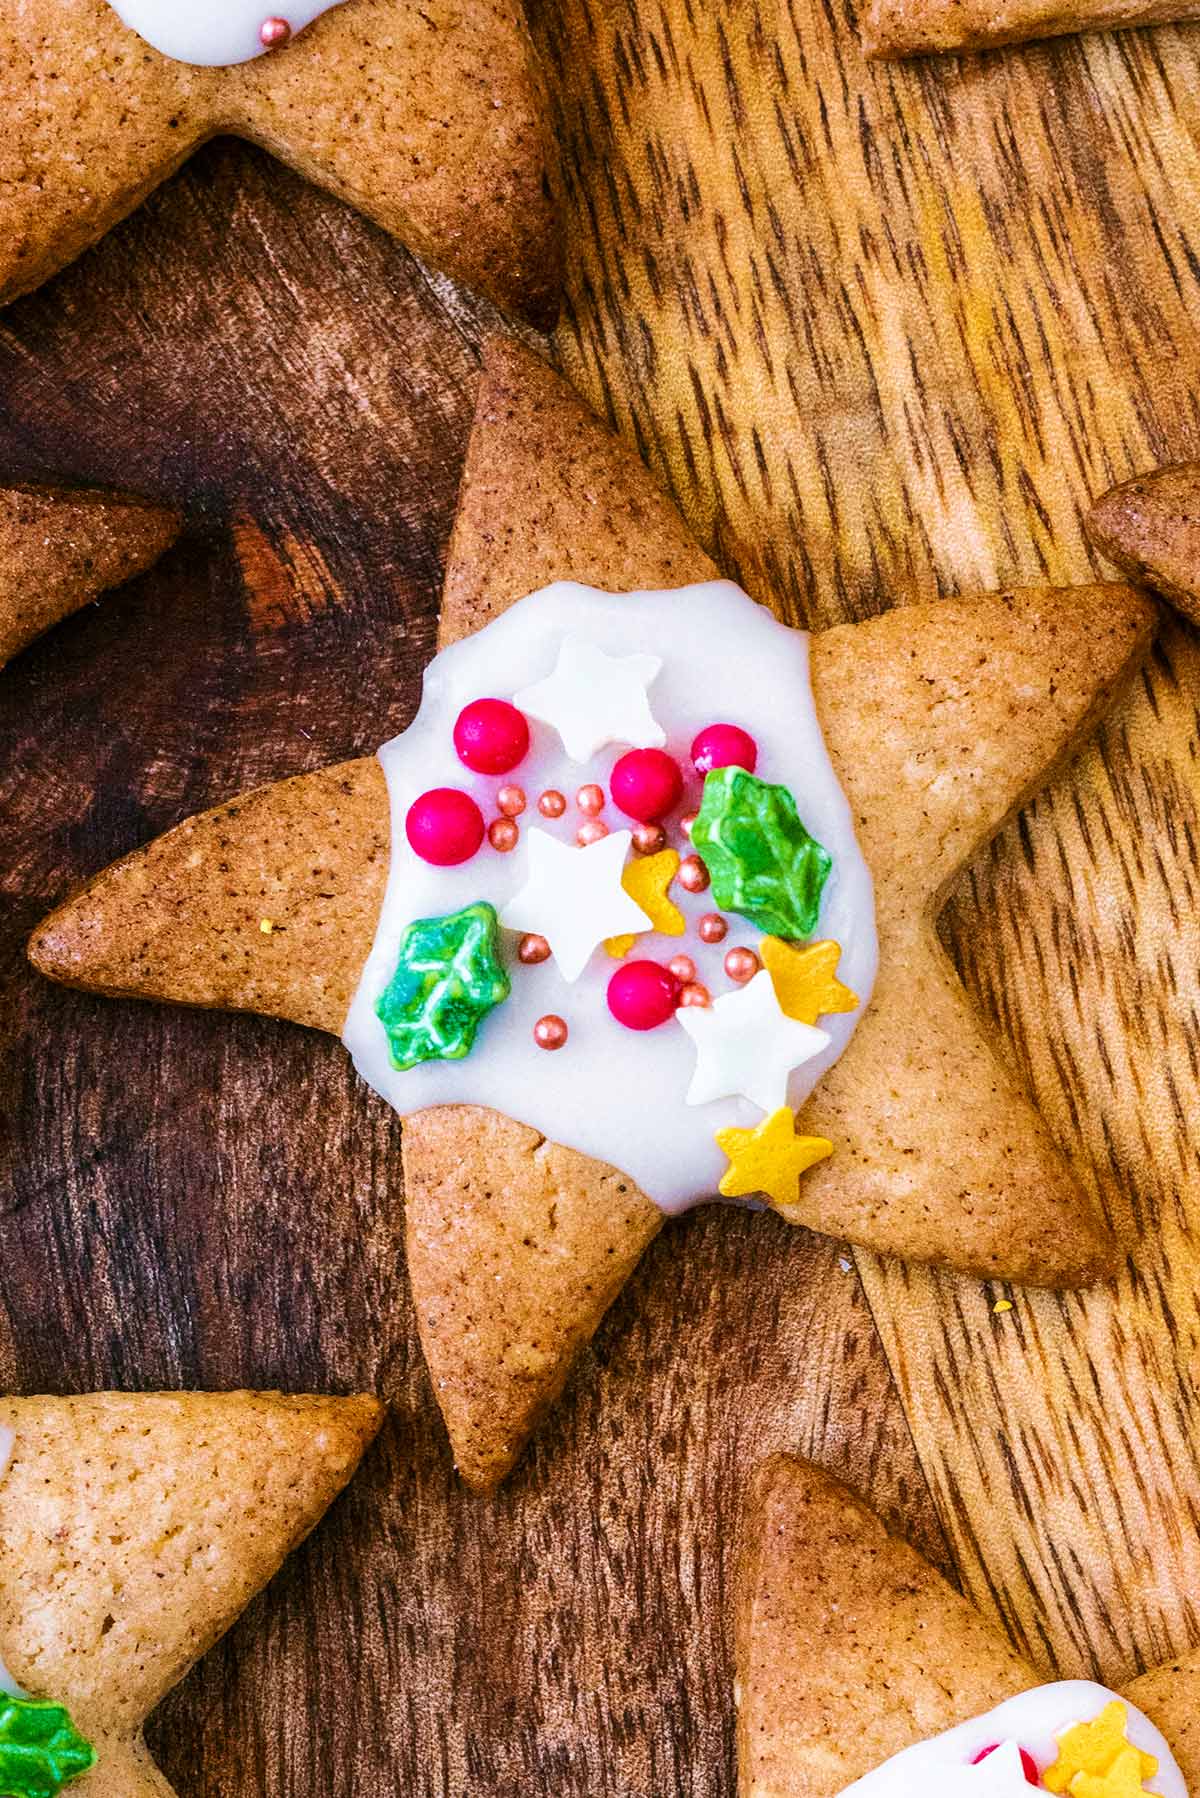 A star shaped biscuit topped with white icing and some festive sugar sprinkles.